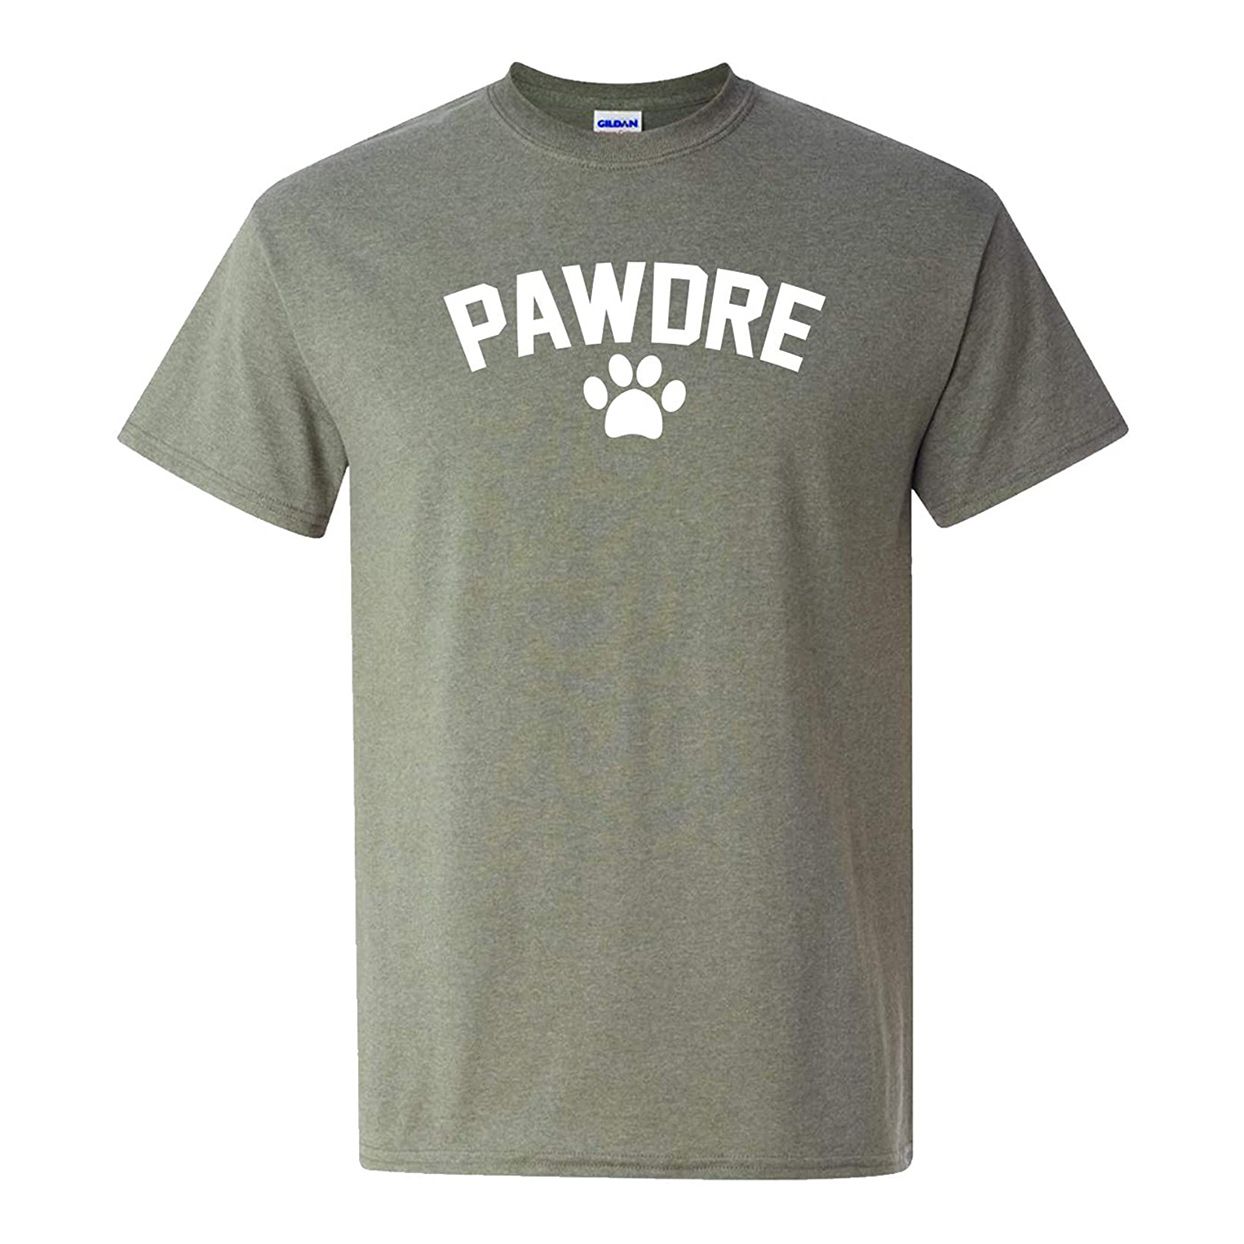 Product photo of a Pawdre Printed Dog Dad Tee Shirt on a white background